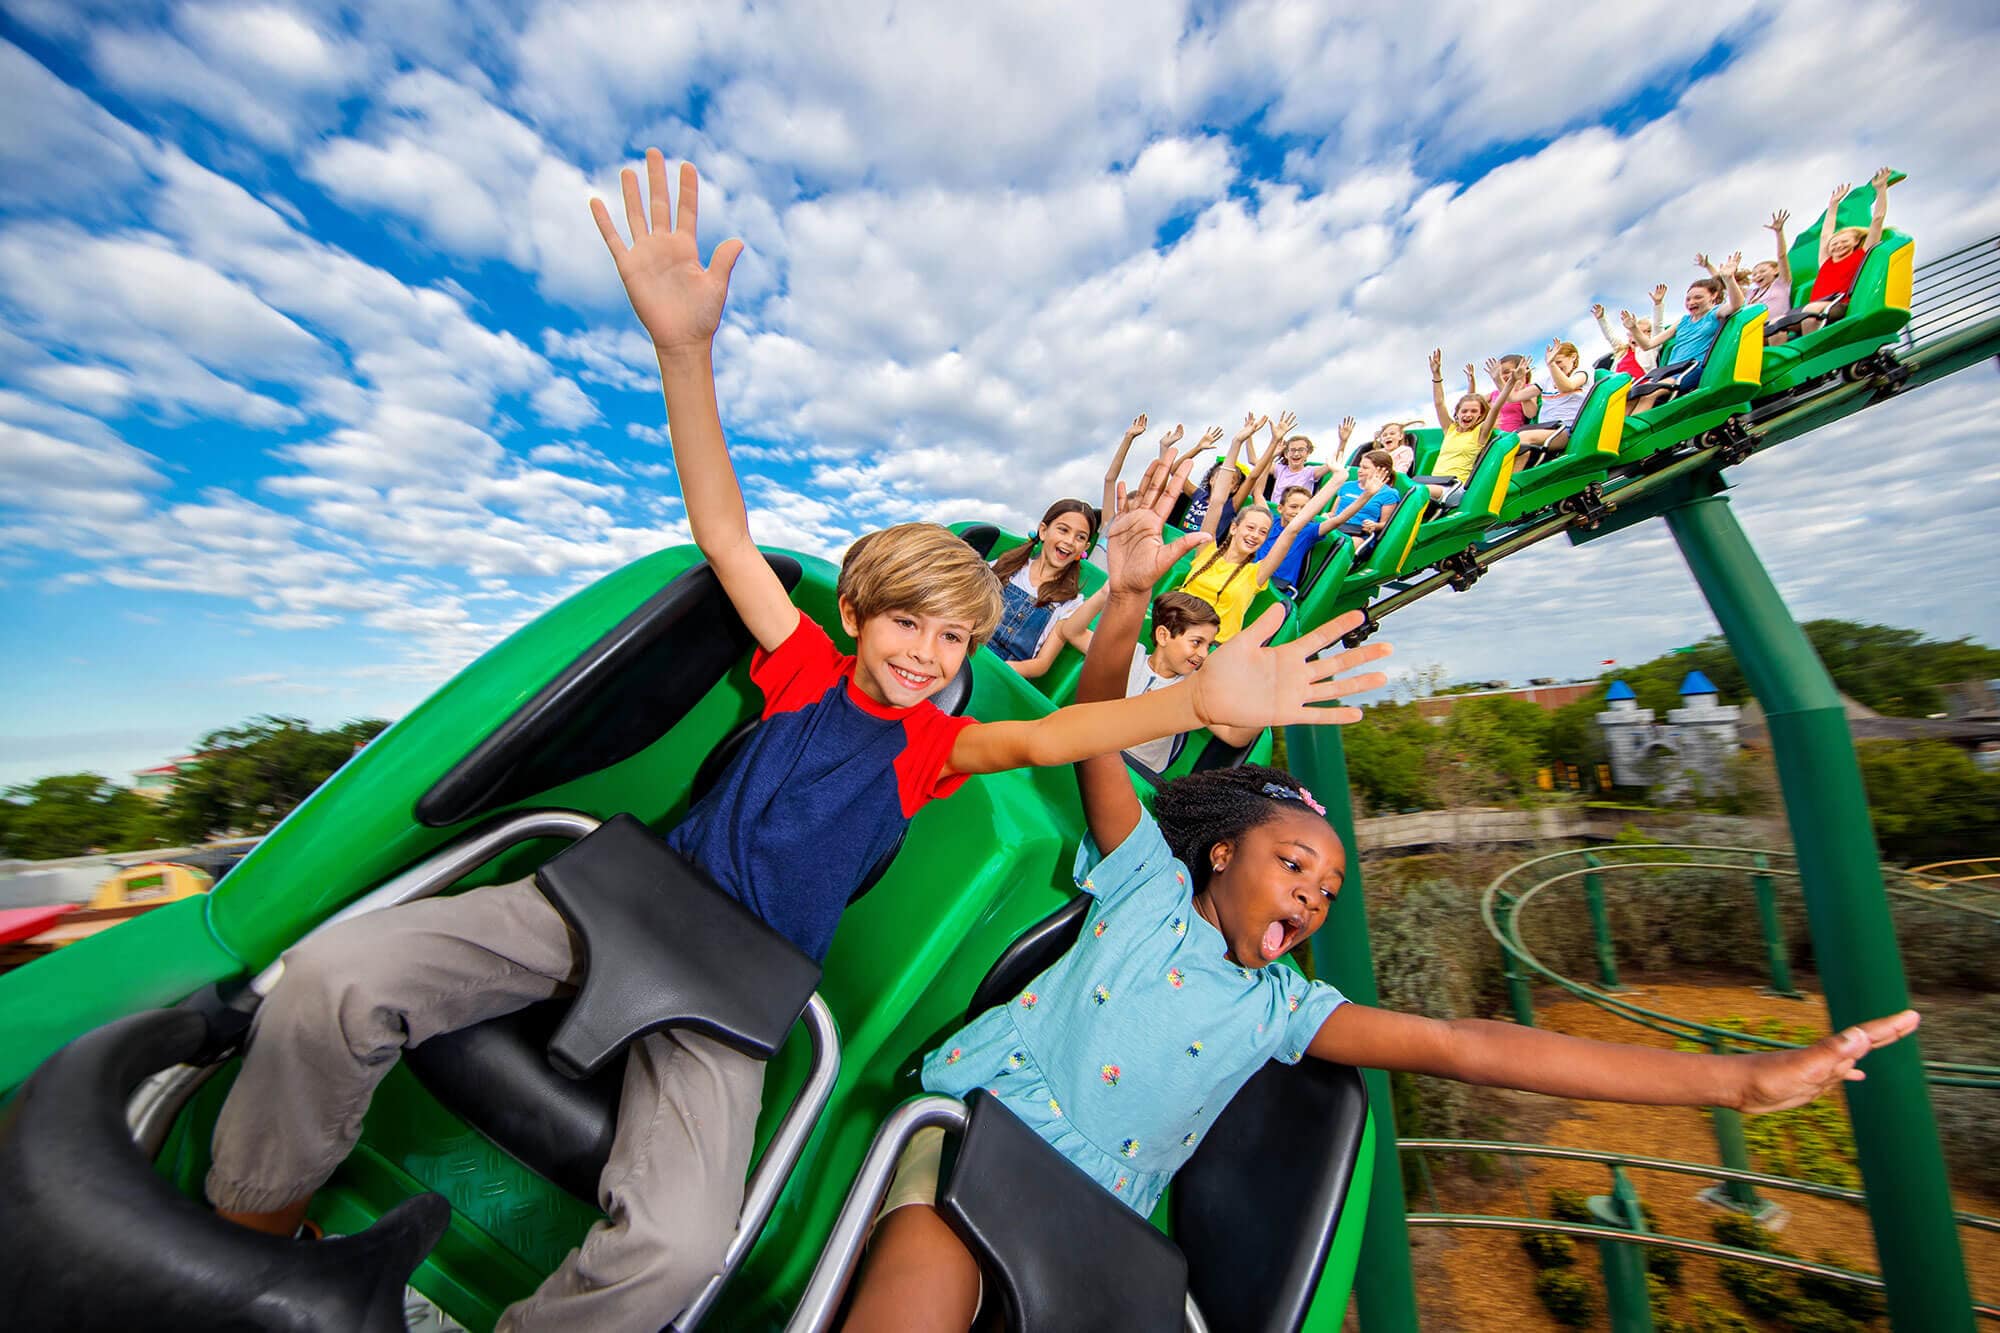 kids with hands up on Dragon Coaster Ride at LEGOLAND Florida Resort in Winter Haven, FL